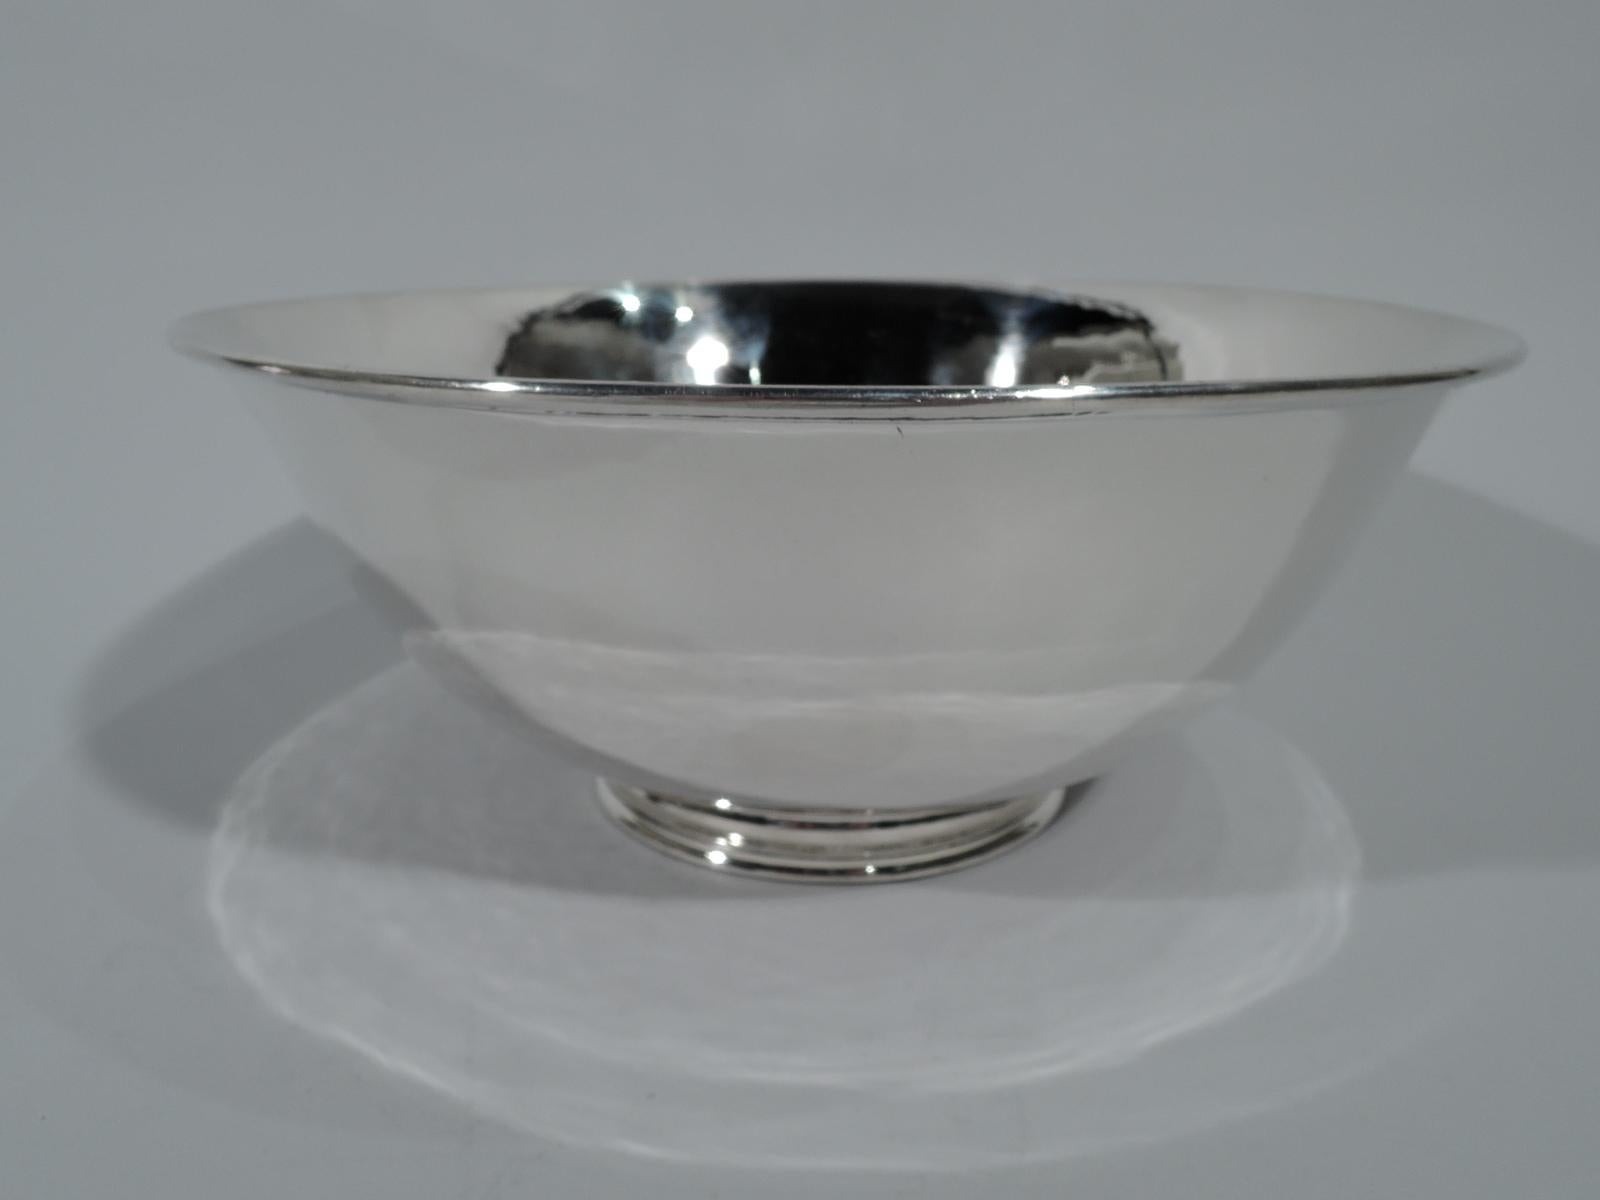 Craftsman hand-hammered sterling silver bowl. Made by Arthur Stone in Gardner, Mass. Curved and tapering sides and stepped inset foot. Hallmark includes silversmith’s initial U for Earl H. Underwood, who was active from 1921-7. Weight: 24 troy